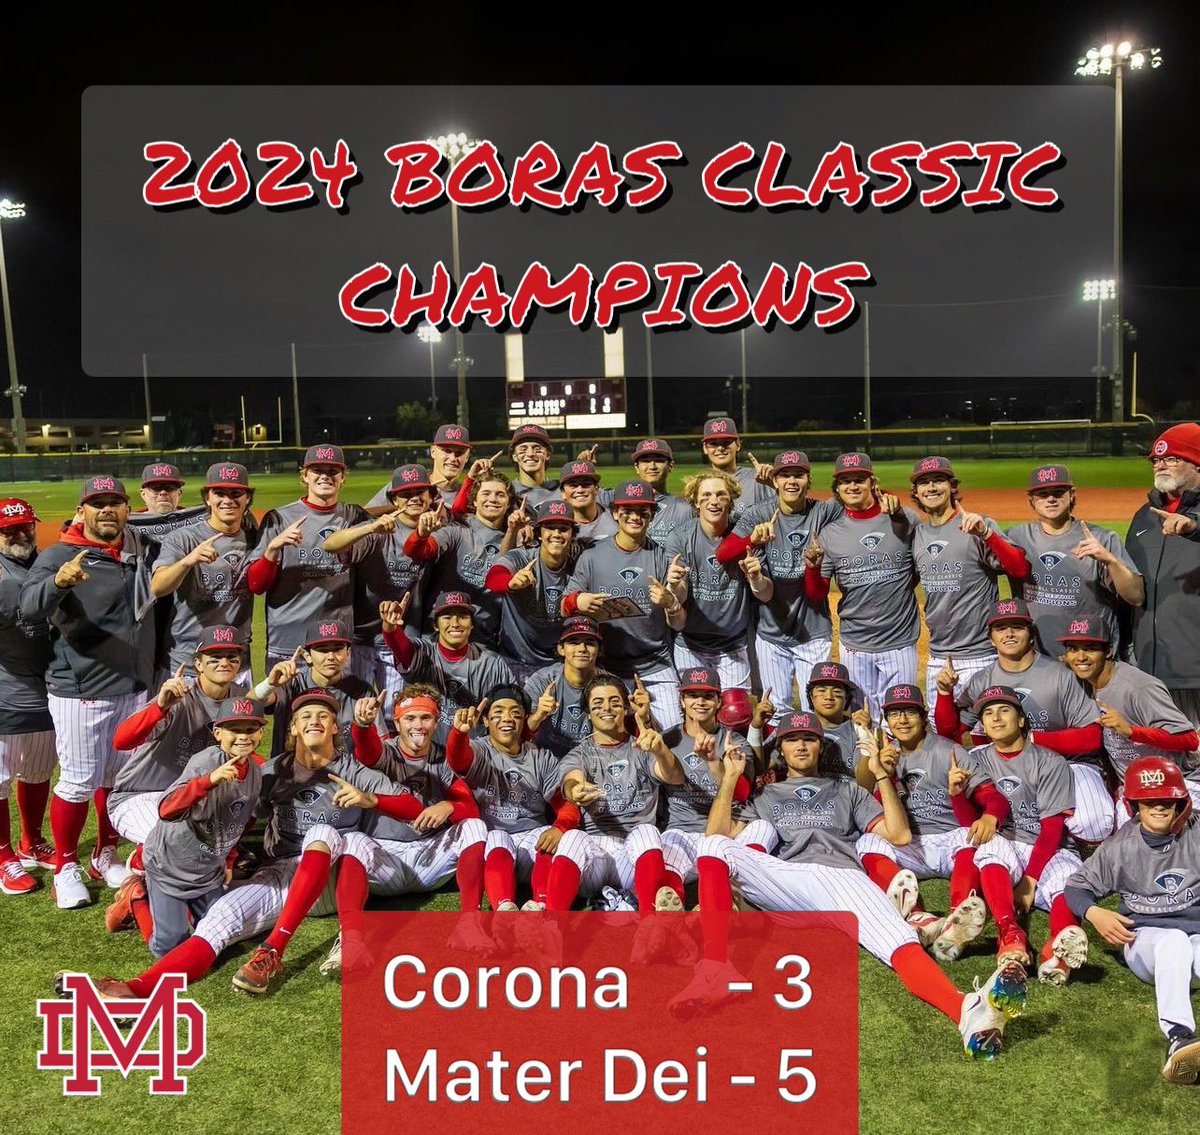 Monarchs are the 24 Boras Classic Champs! MD now play in the BC state championship game against Granite Hills on April 20th @ Santa Clara Univ.
TY to the Boras Foundation and sponsors. @MelissasProduce @wilsonballglove @DeMarini @ucihealth @ChickfilA @TheBorasClassic @mdathletics